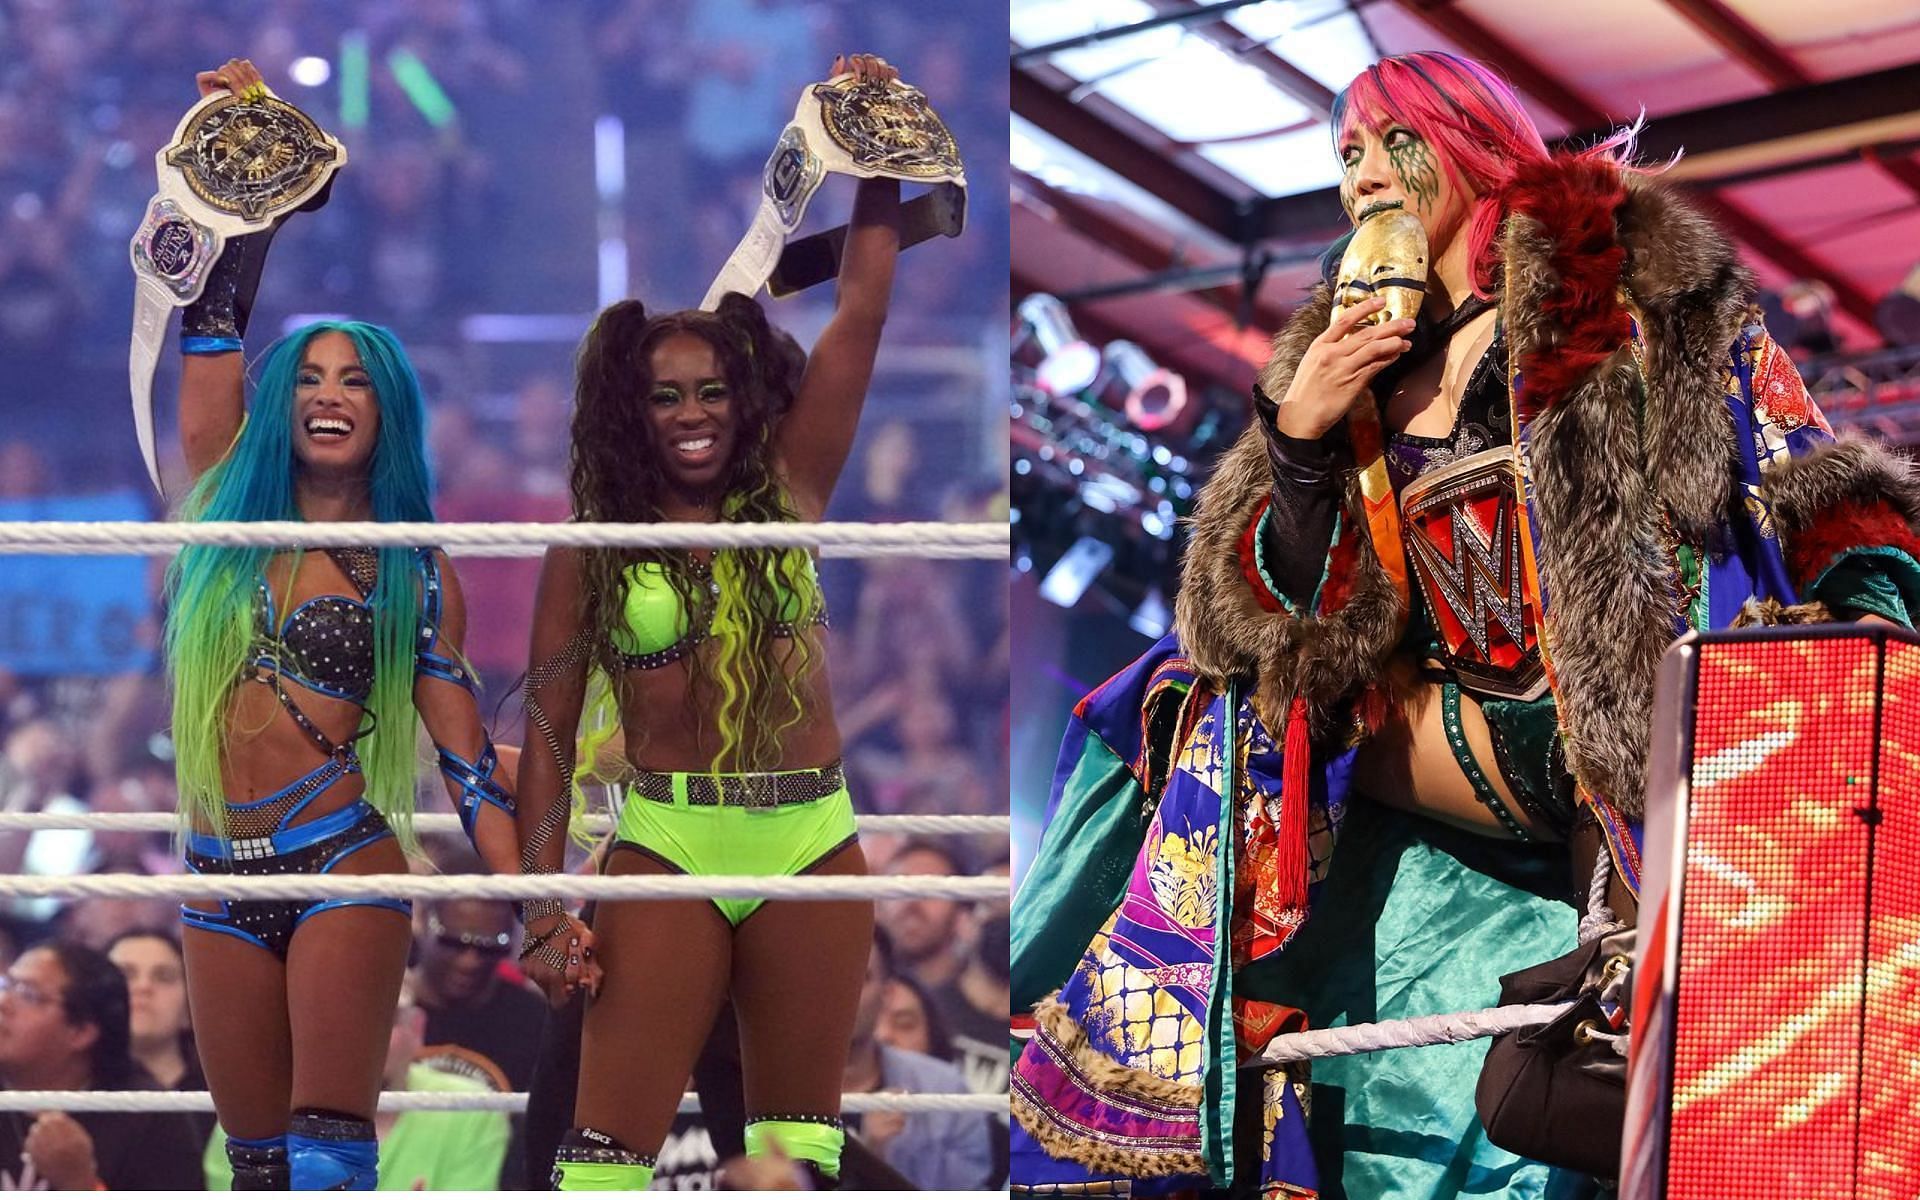 Some women superstars have been overlooked by WWE